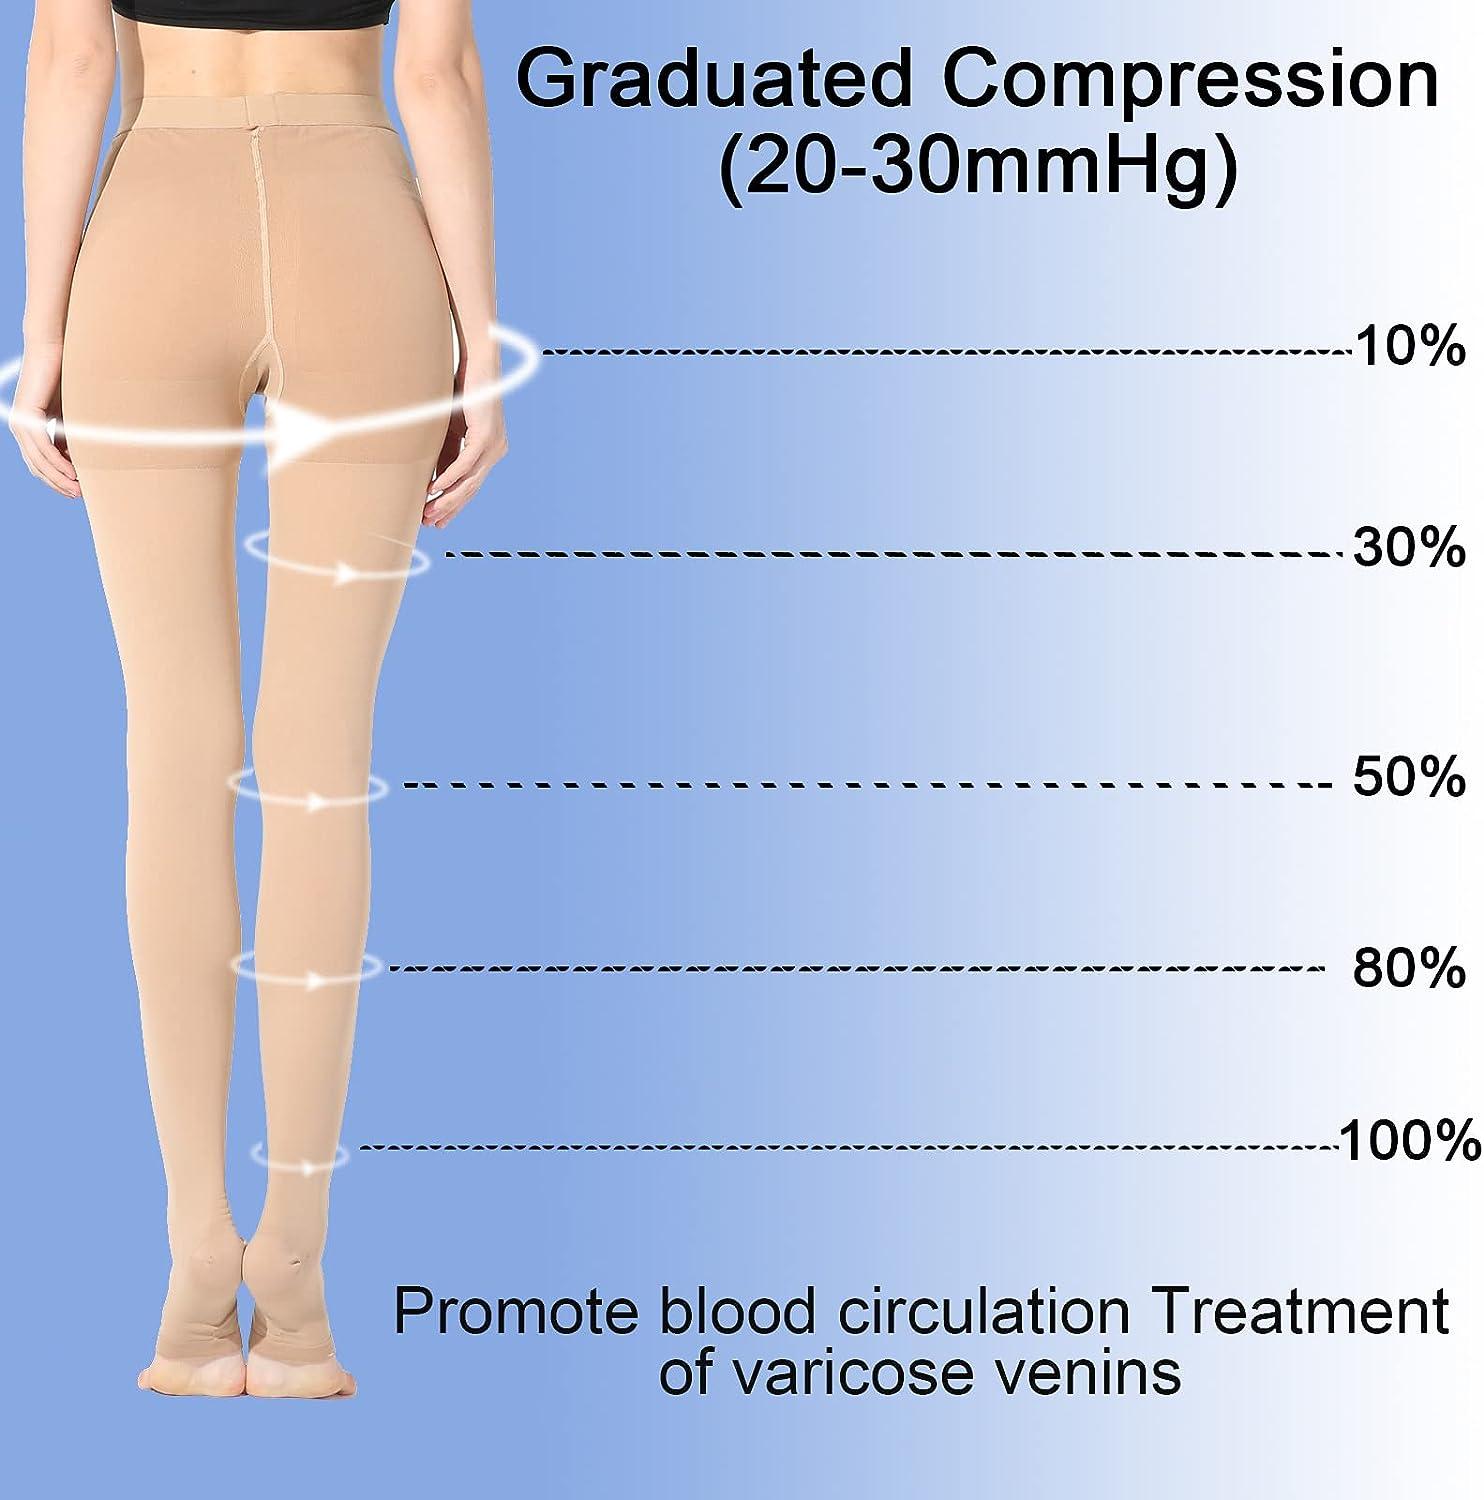 Medical Compression Pantyhose for Women & Men,20-30 mmHg Graduated Support  Hose Tights,Footless Waist High Compression Stockings for Swelling Edema